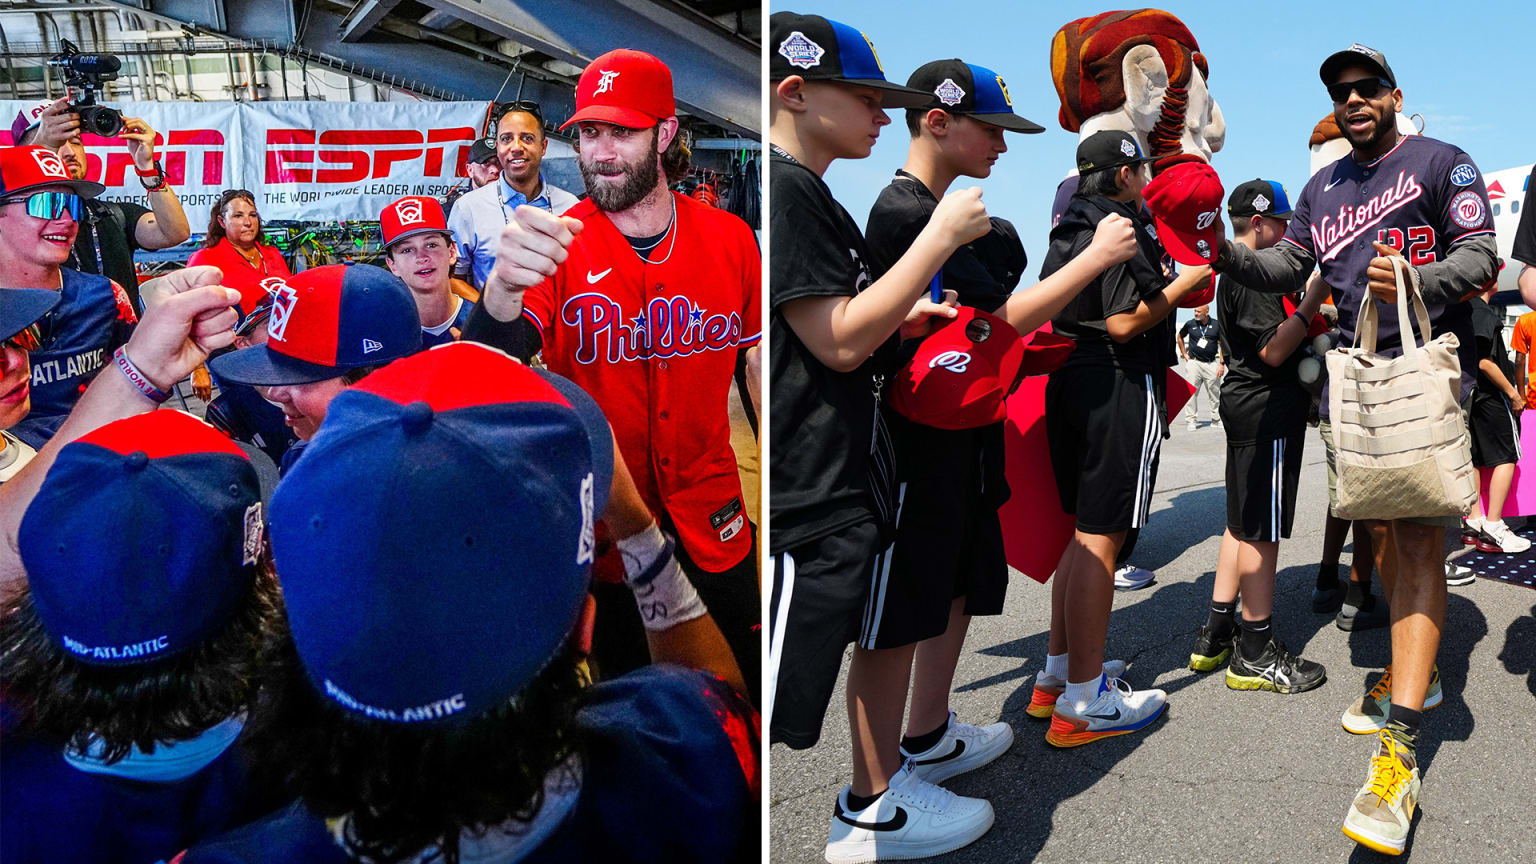 A split photo shows Bryce Harper and Dominic Smith with Little League players